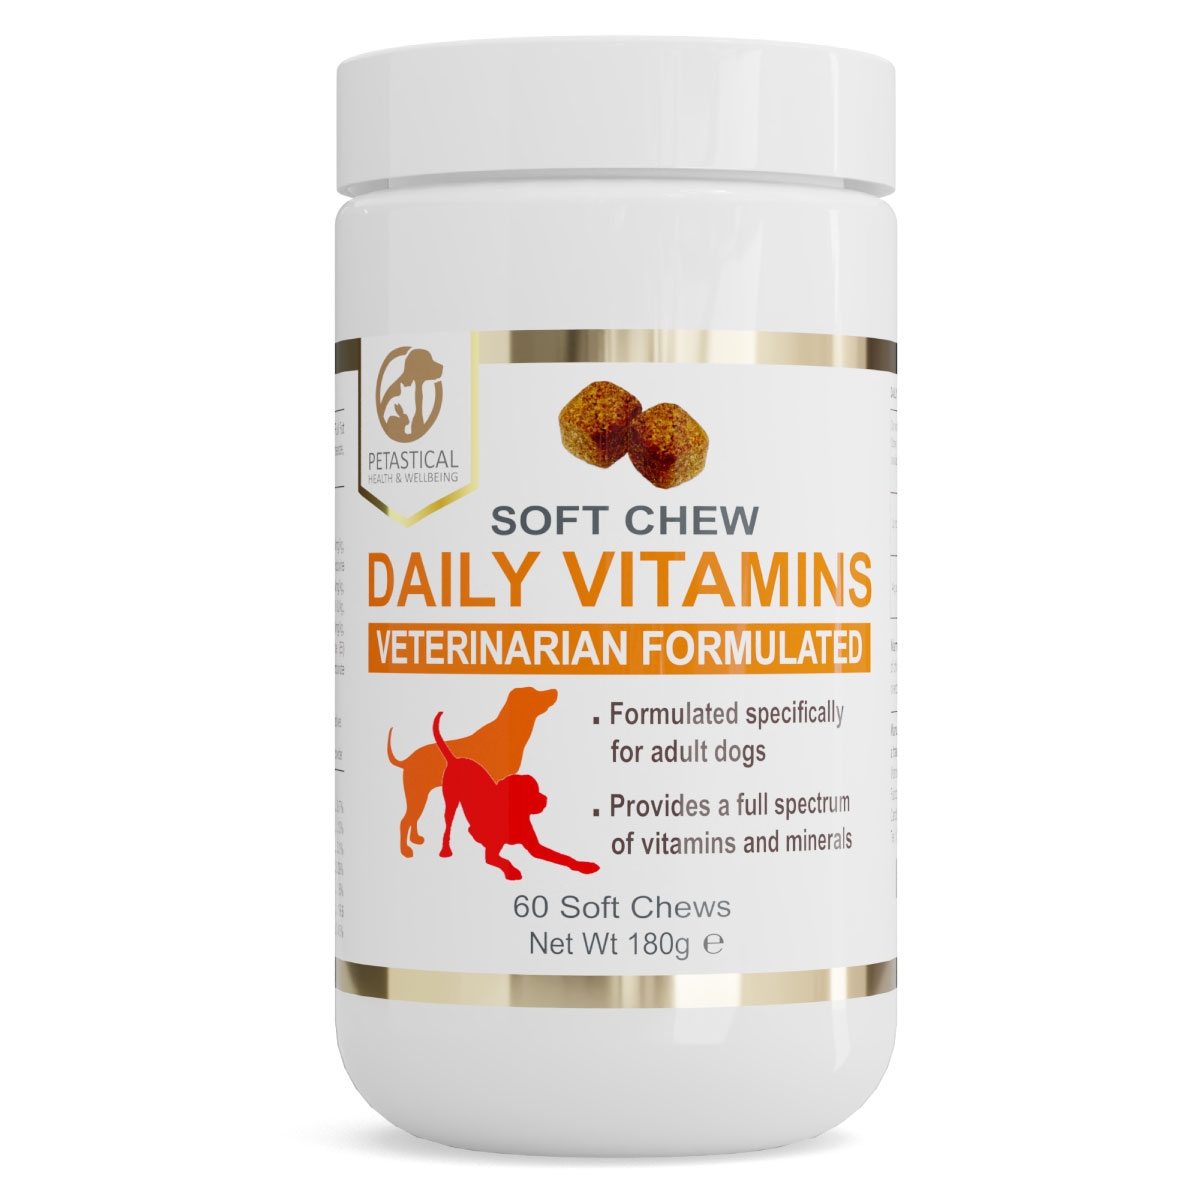 Petastical Daily Multi Vitamins and Minerals for Dogs (60 Soft Chews)